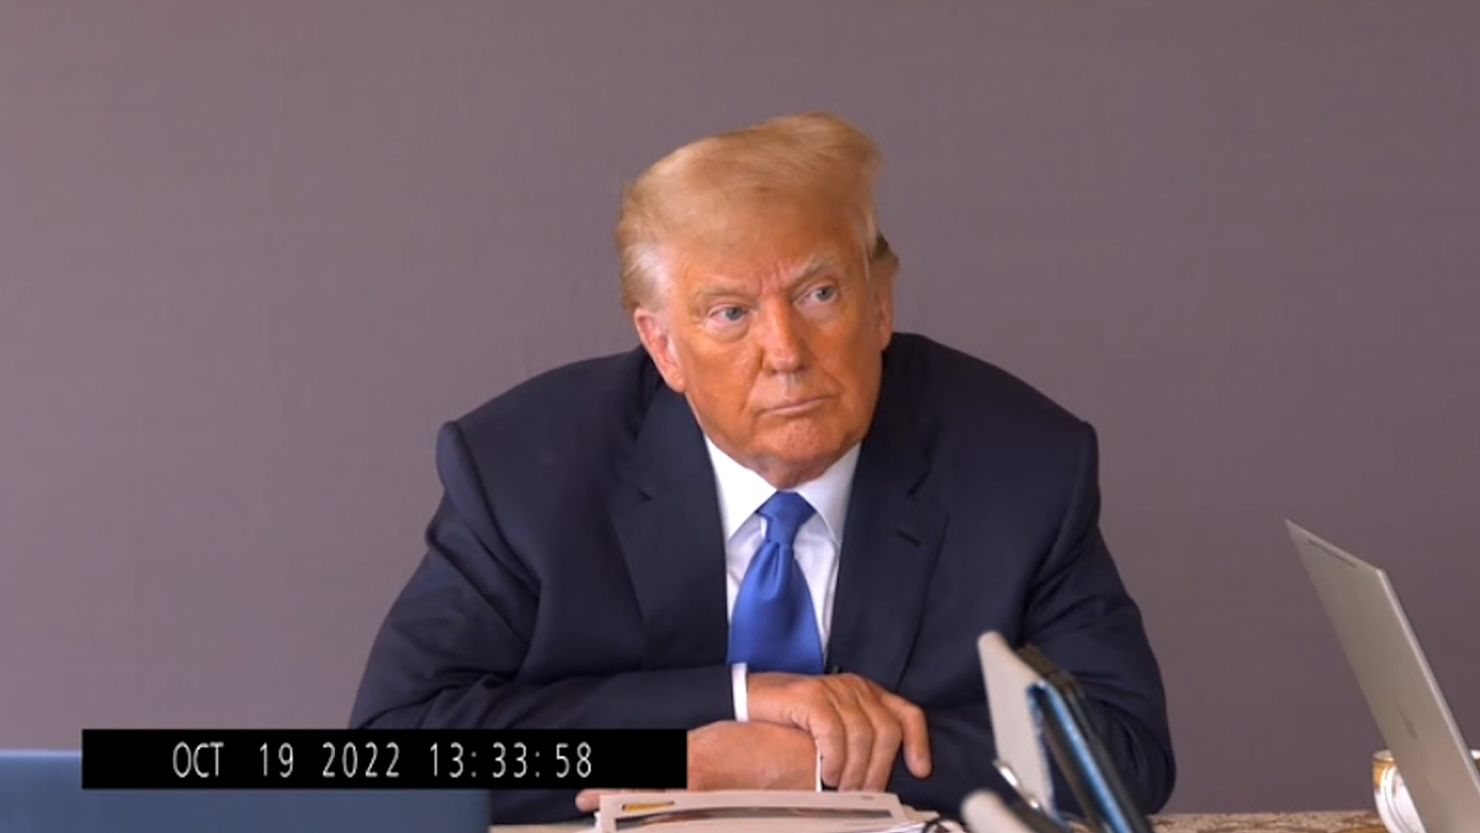 Donald Trump's video deposition that was played before the jury at his civil battery and defamation trial has been made public.